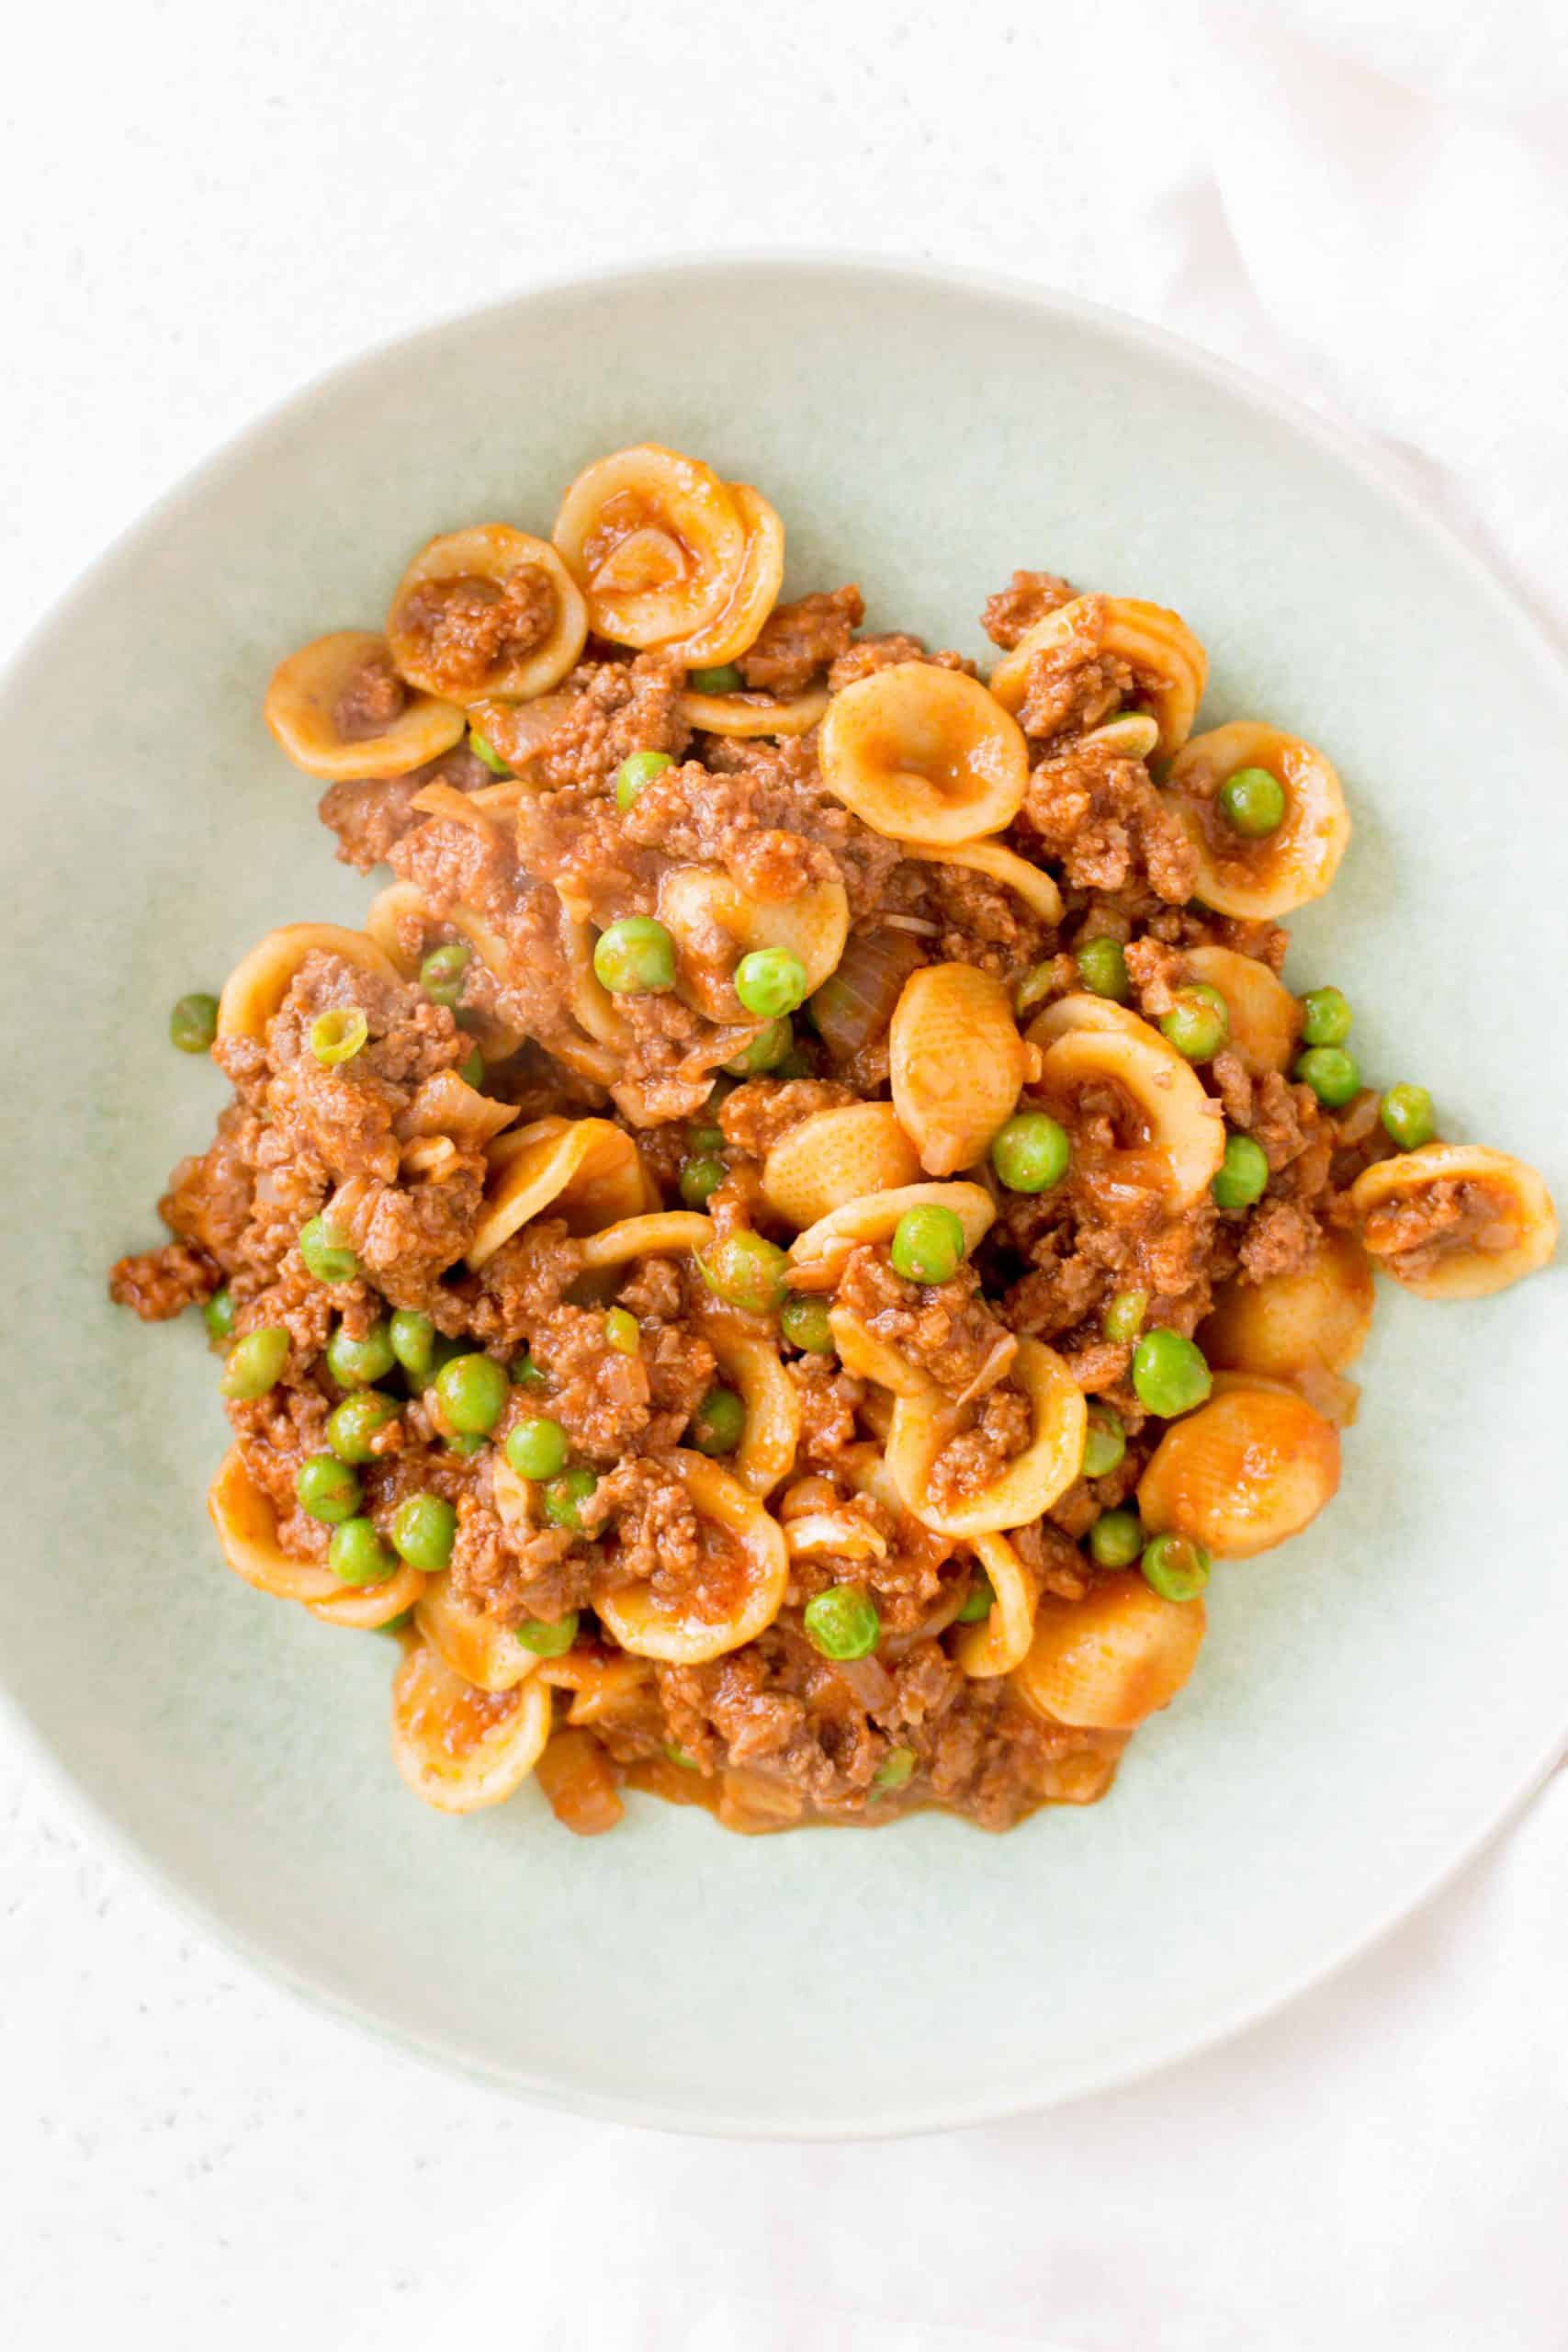 A plate of Orecchiette Pasta with Beef and Peas.